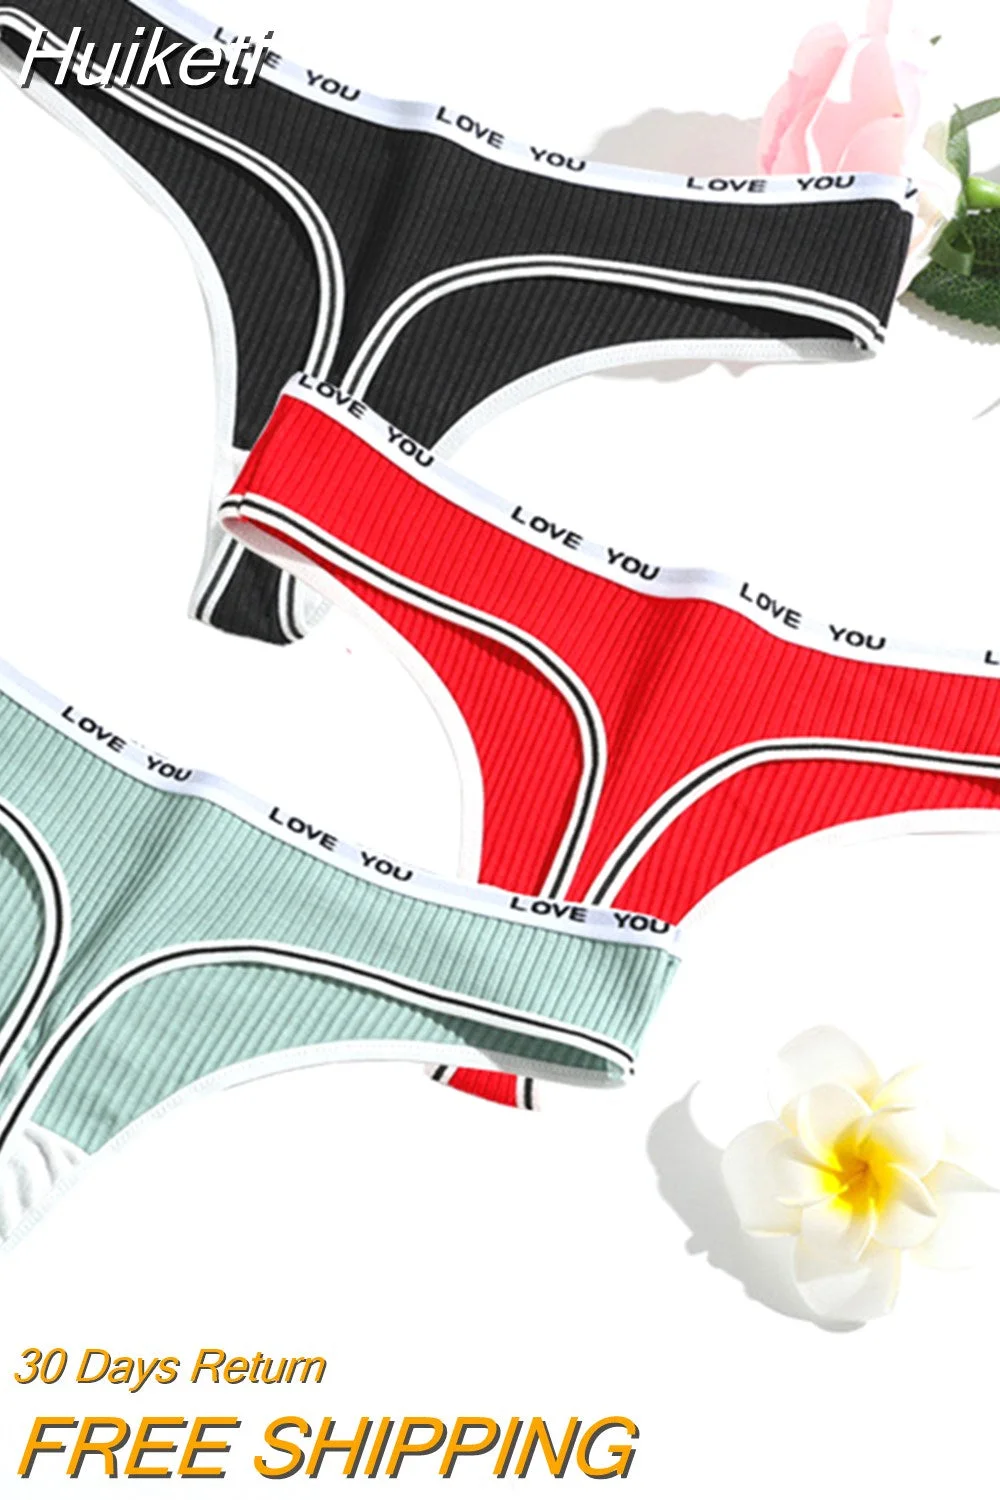 Huiketi Women's Cotton G-String Ladies Thong Letter Low-Rise Panties Underwear Screw Thread Briefs Sexy Lingerie Pants Intimate